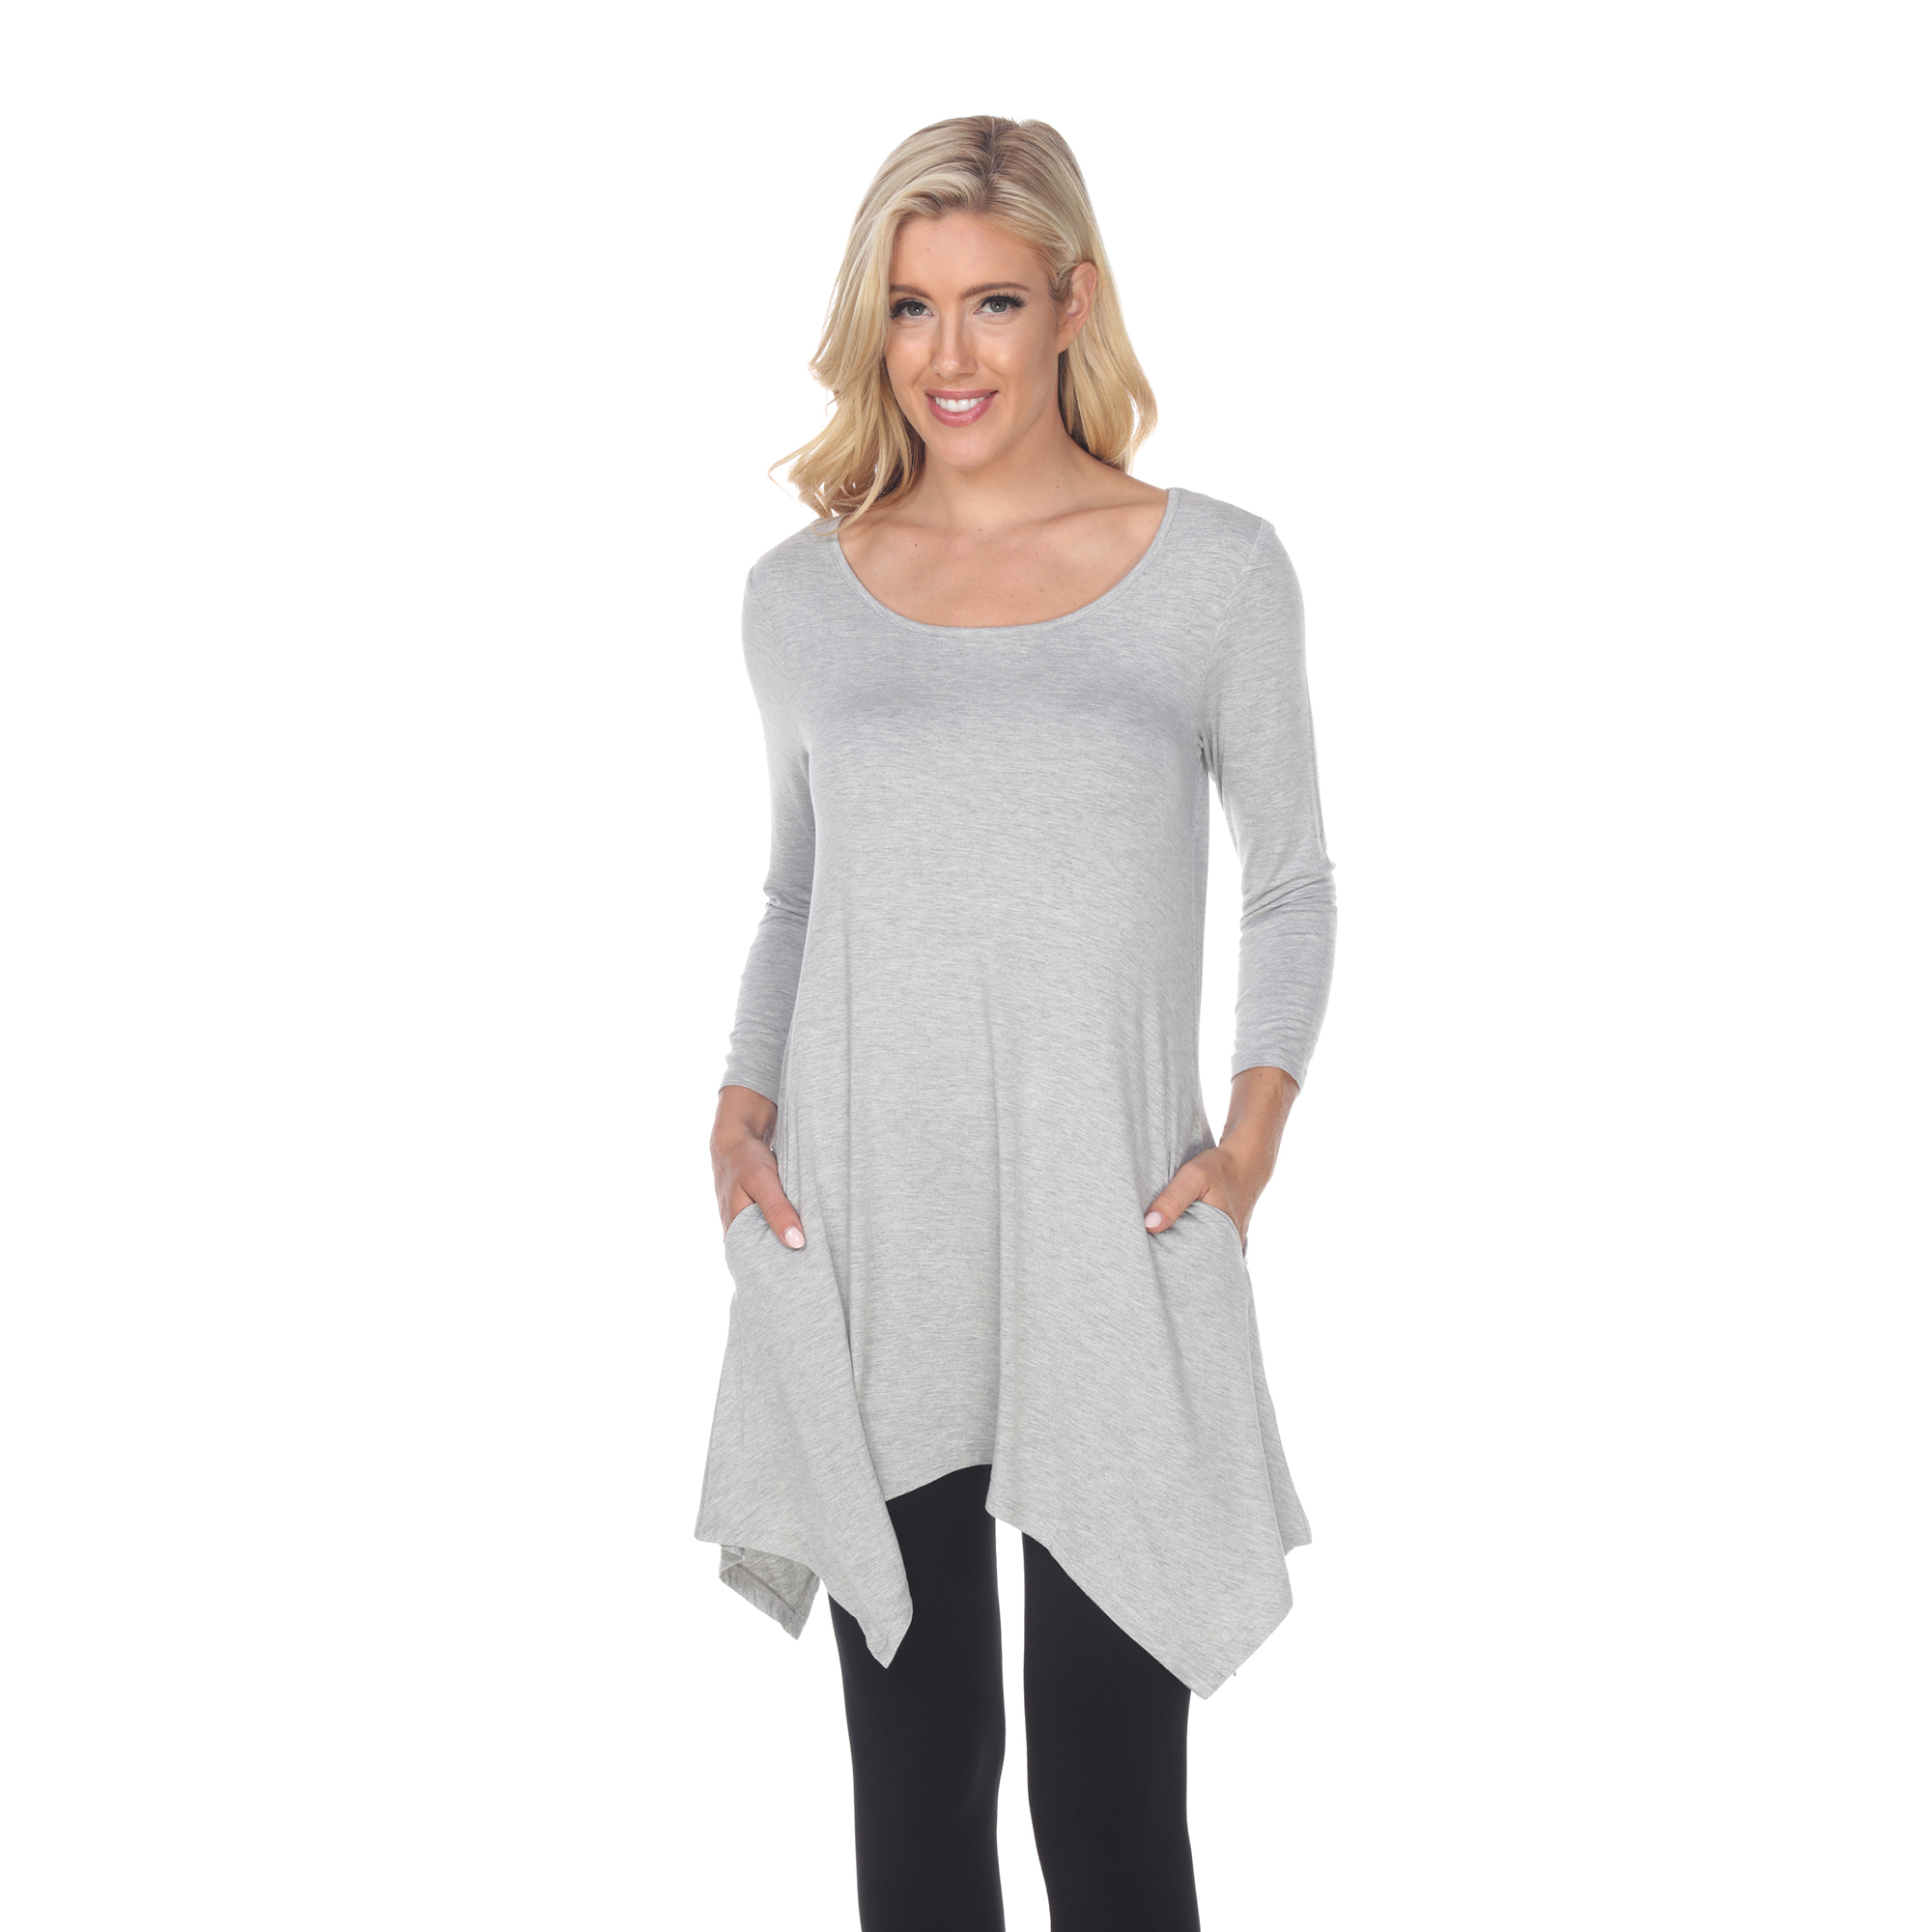 White Mark Women's Quarter Sleeve Tunic Top With Pockets - Heather Grey, 1X